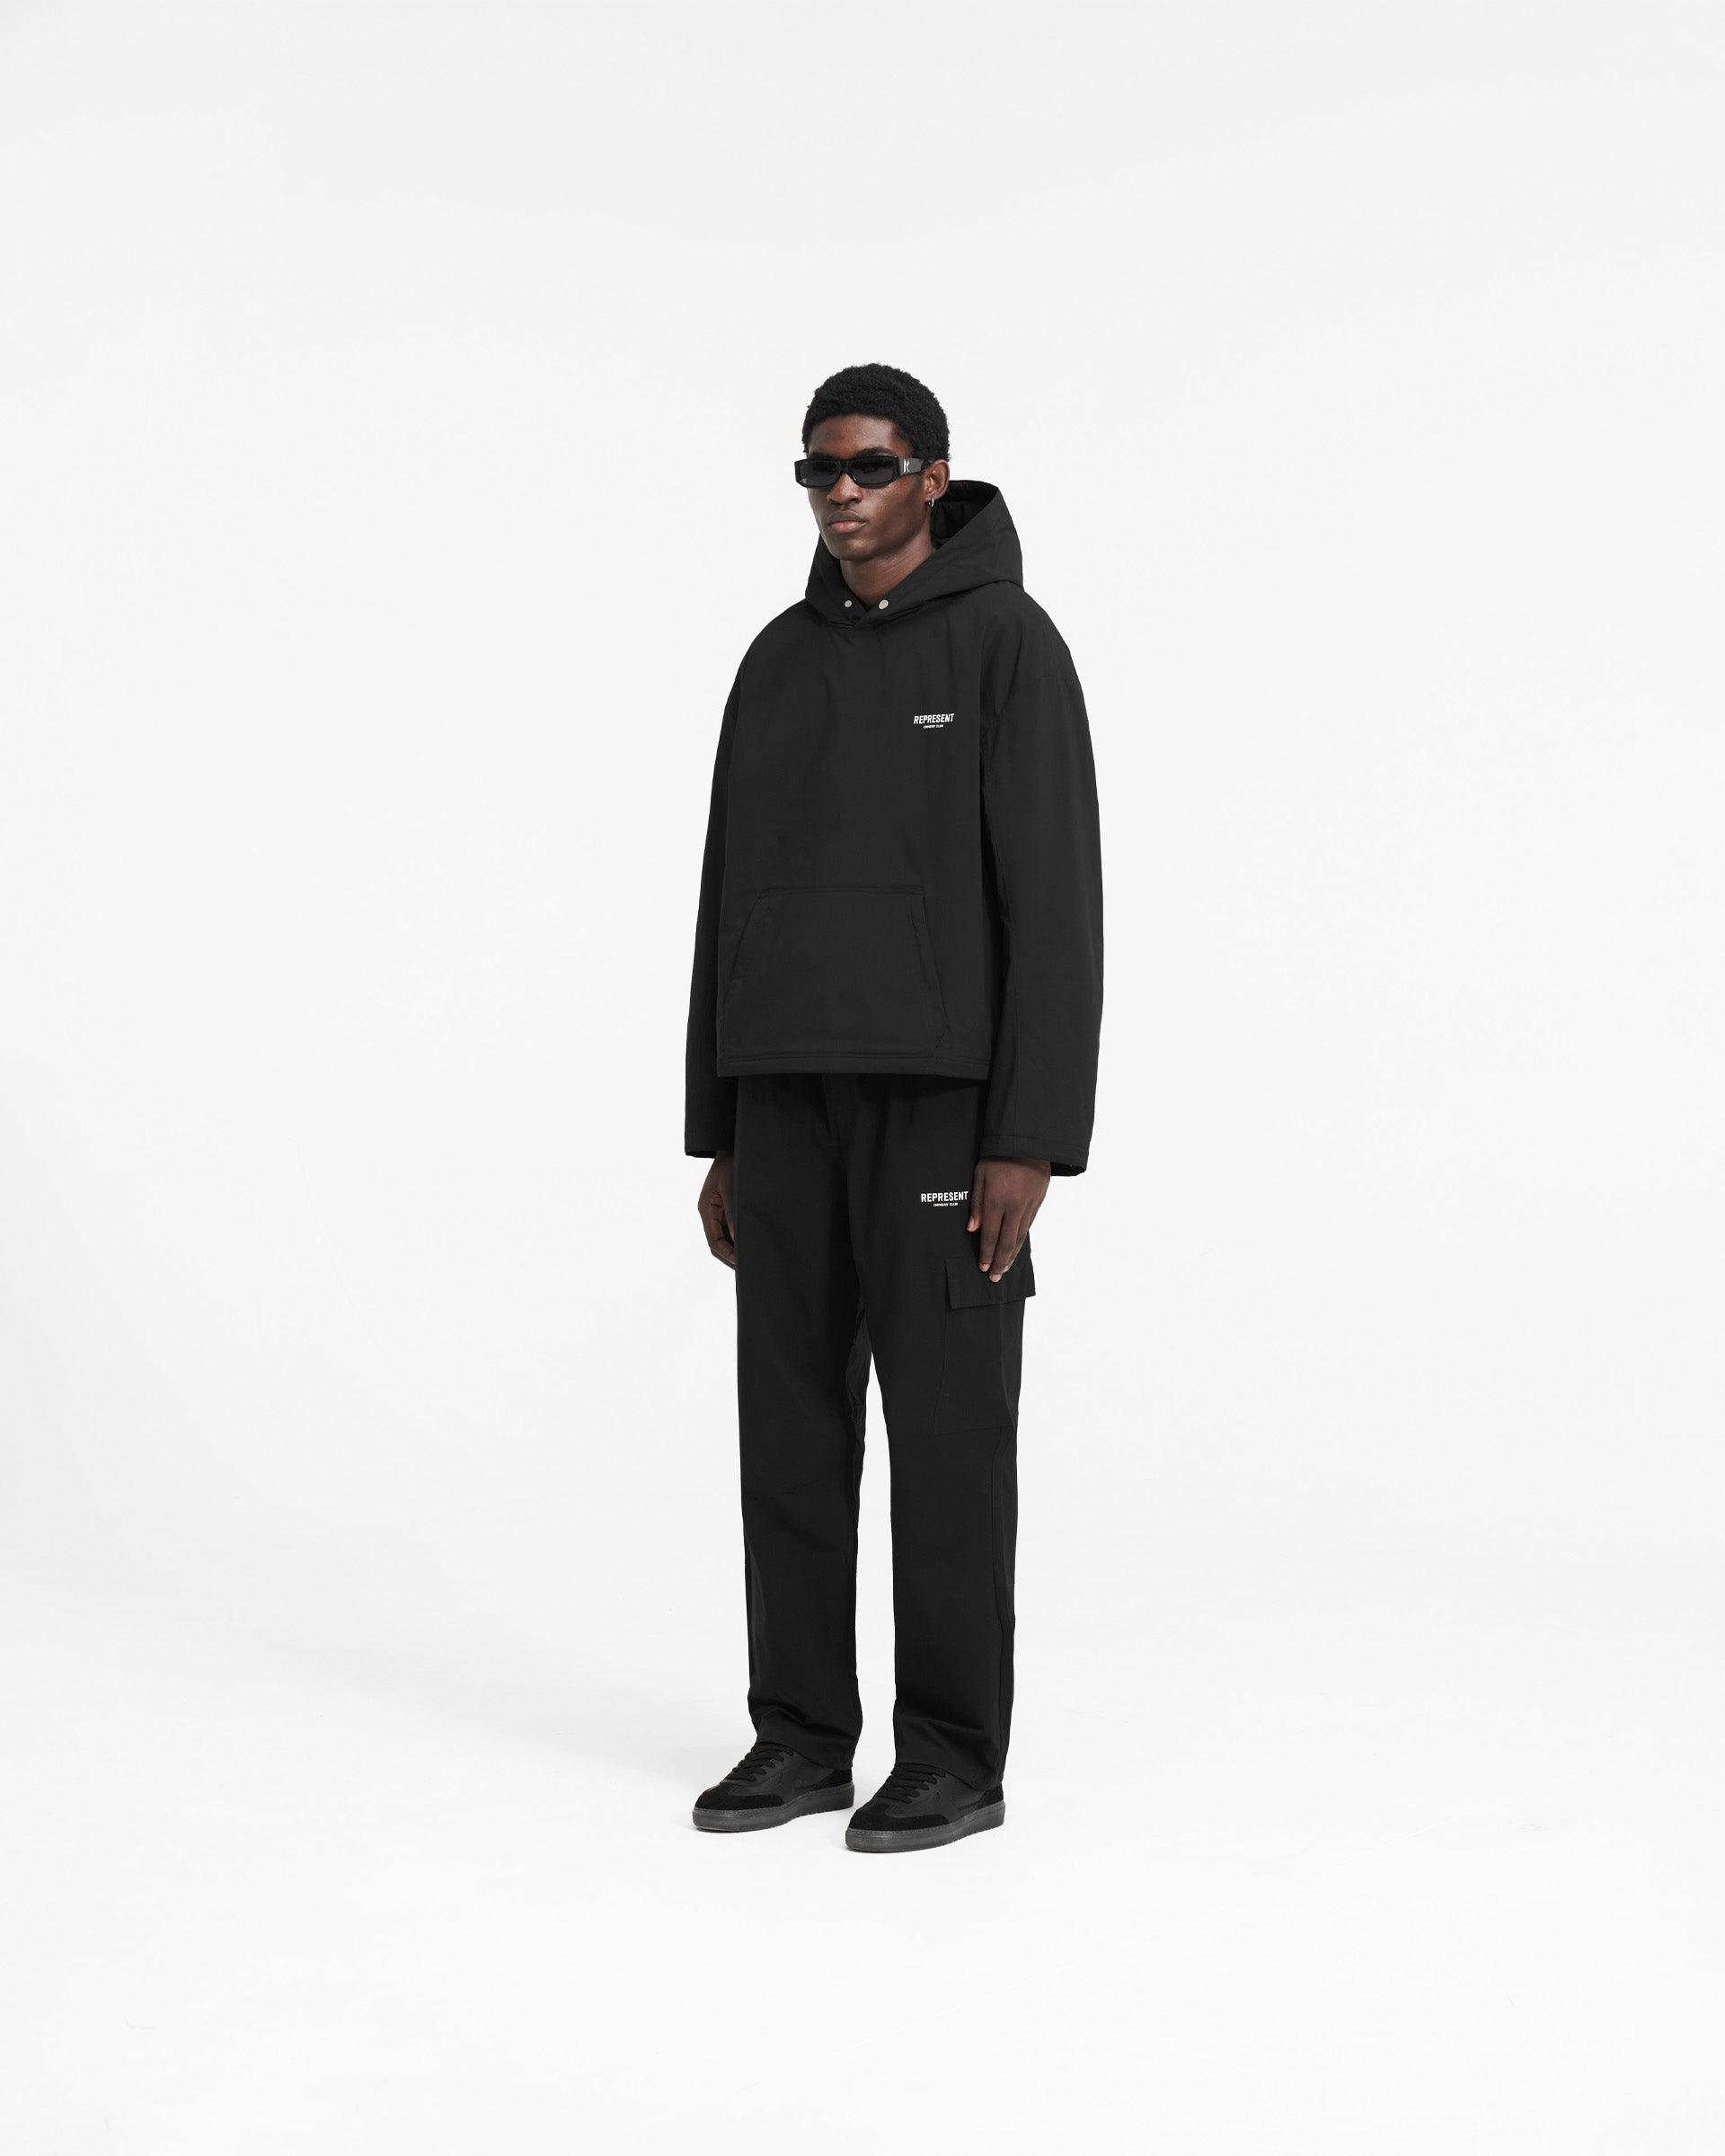 Represent Owners Club Hooded Pullover - Black